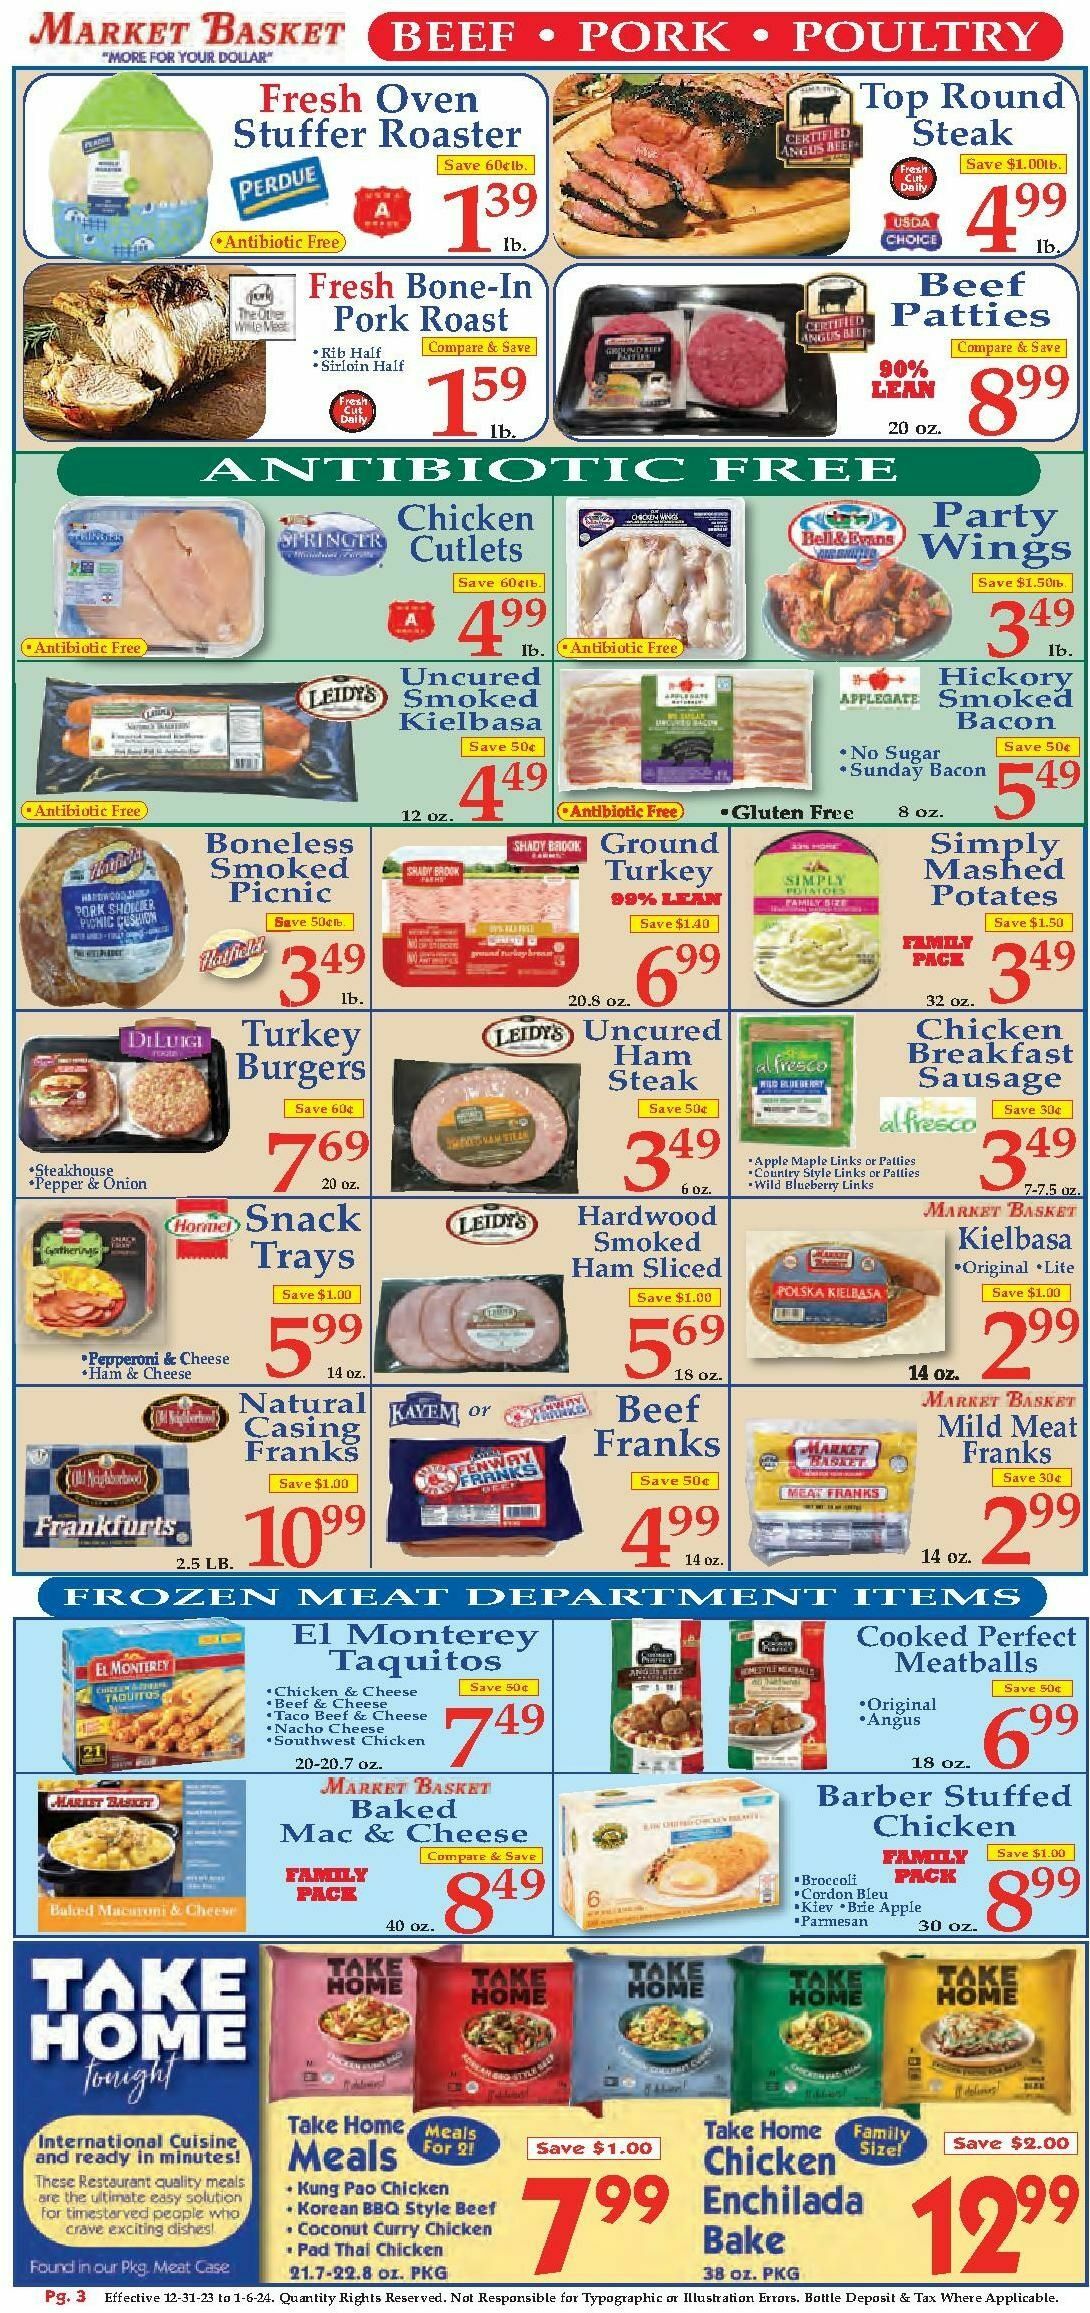 Market Basket Weekly Ad from December 31